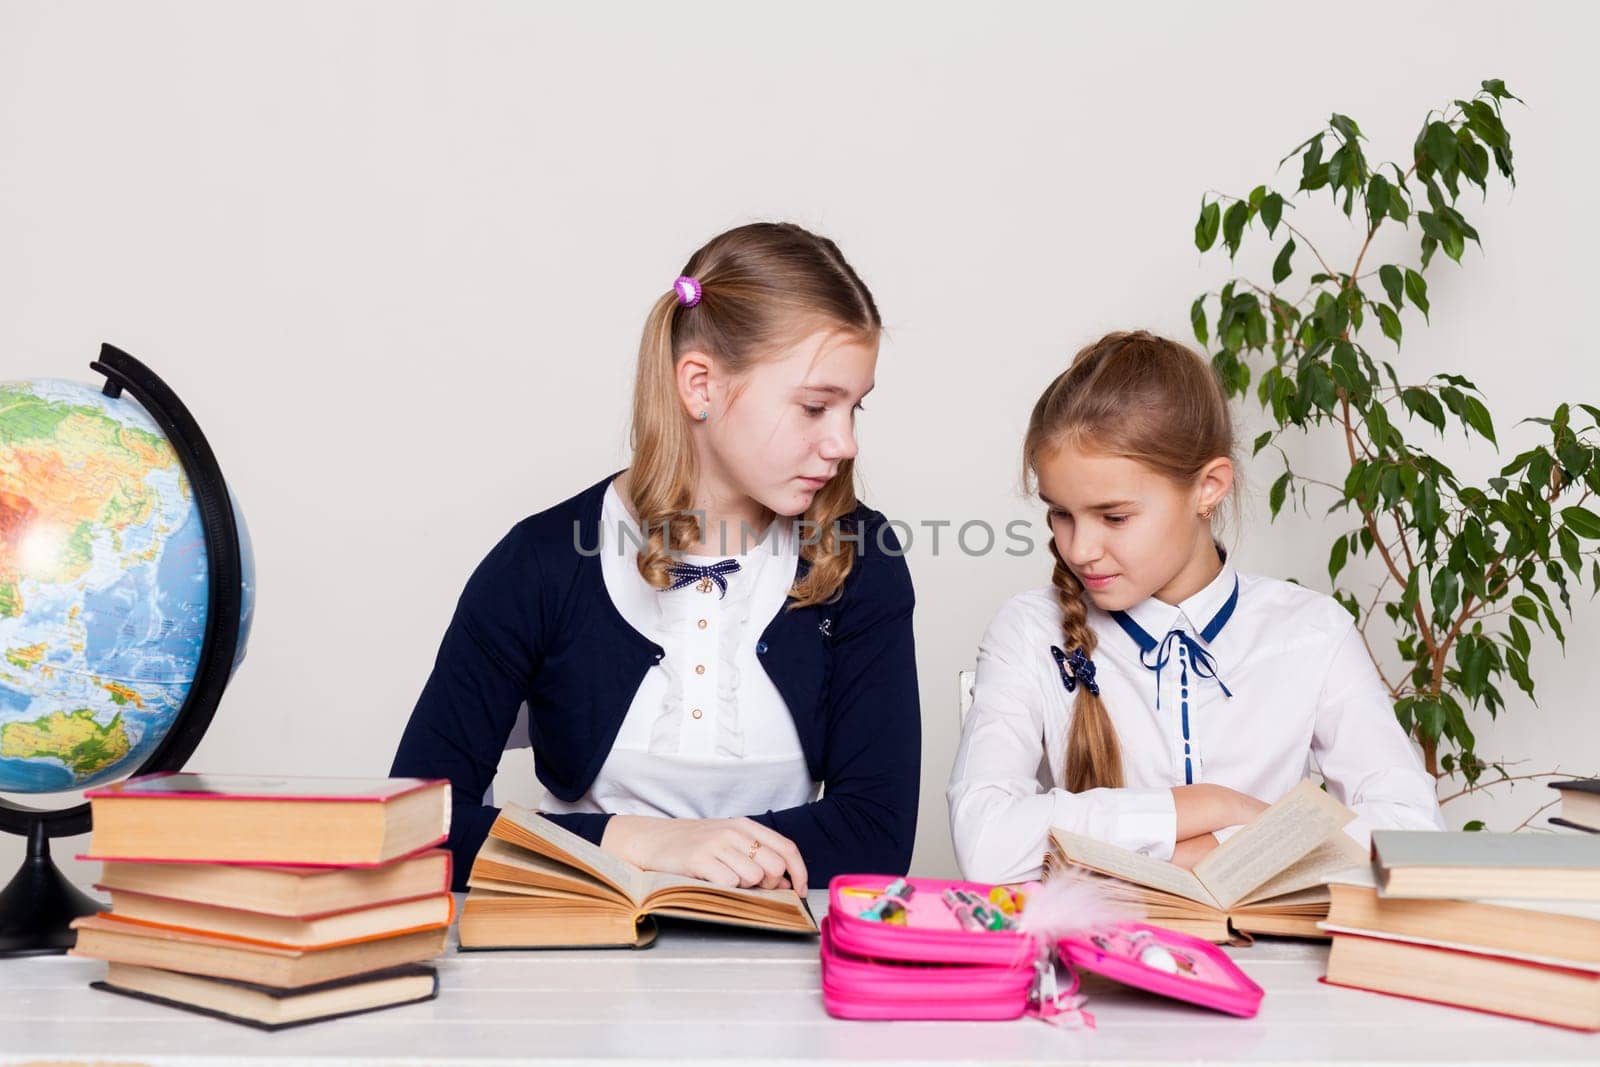 two girls with books and a globe in class at the desk